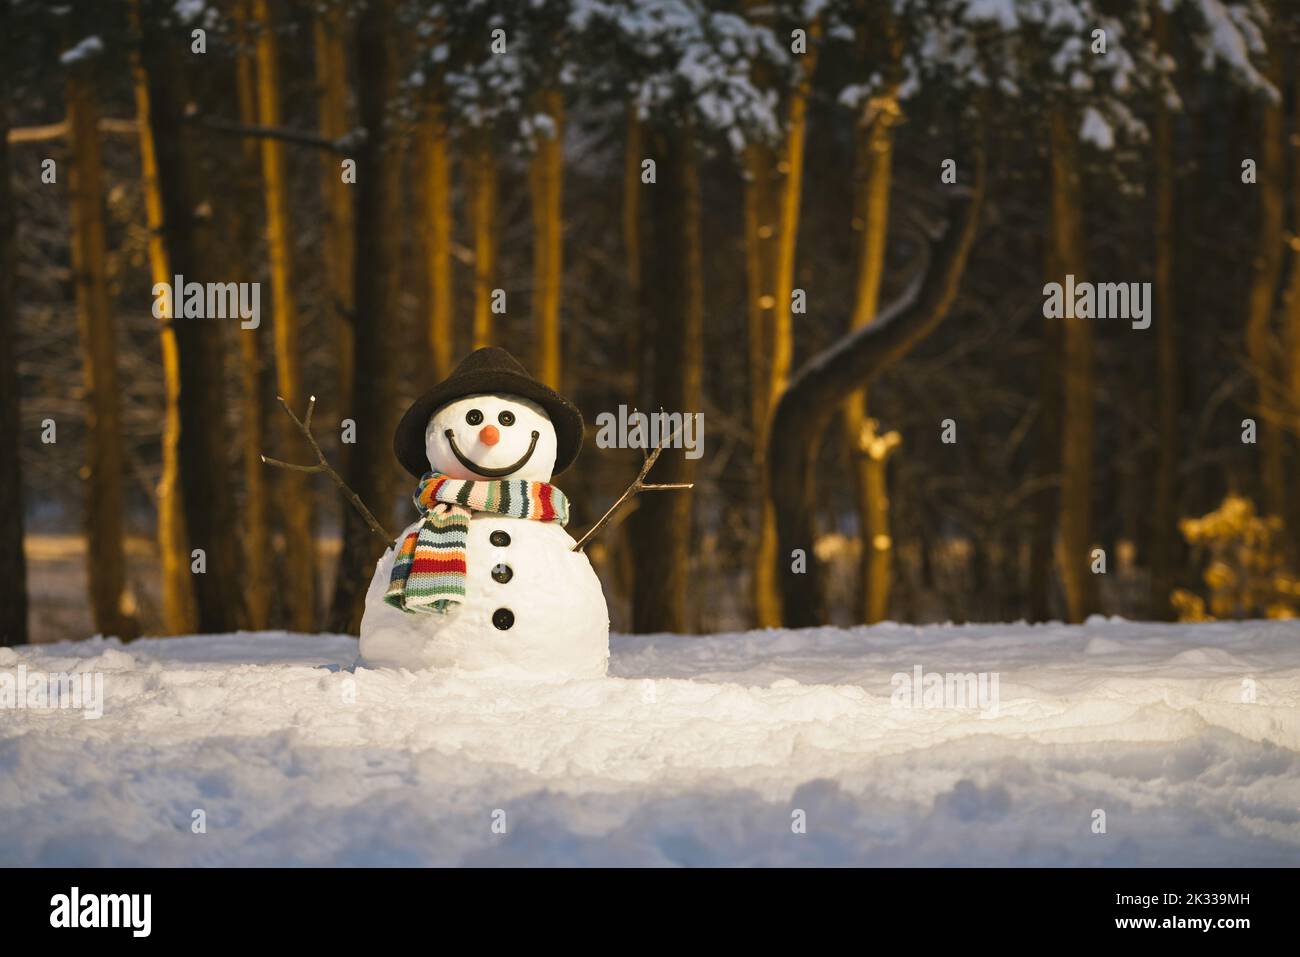 Winter card with a cheerful snowman in a snowy park Stock Photo